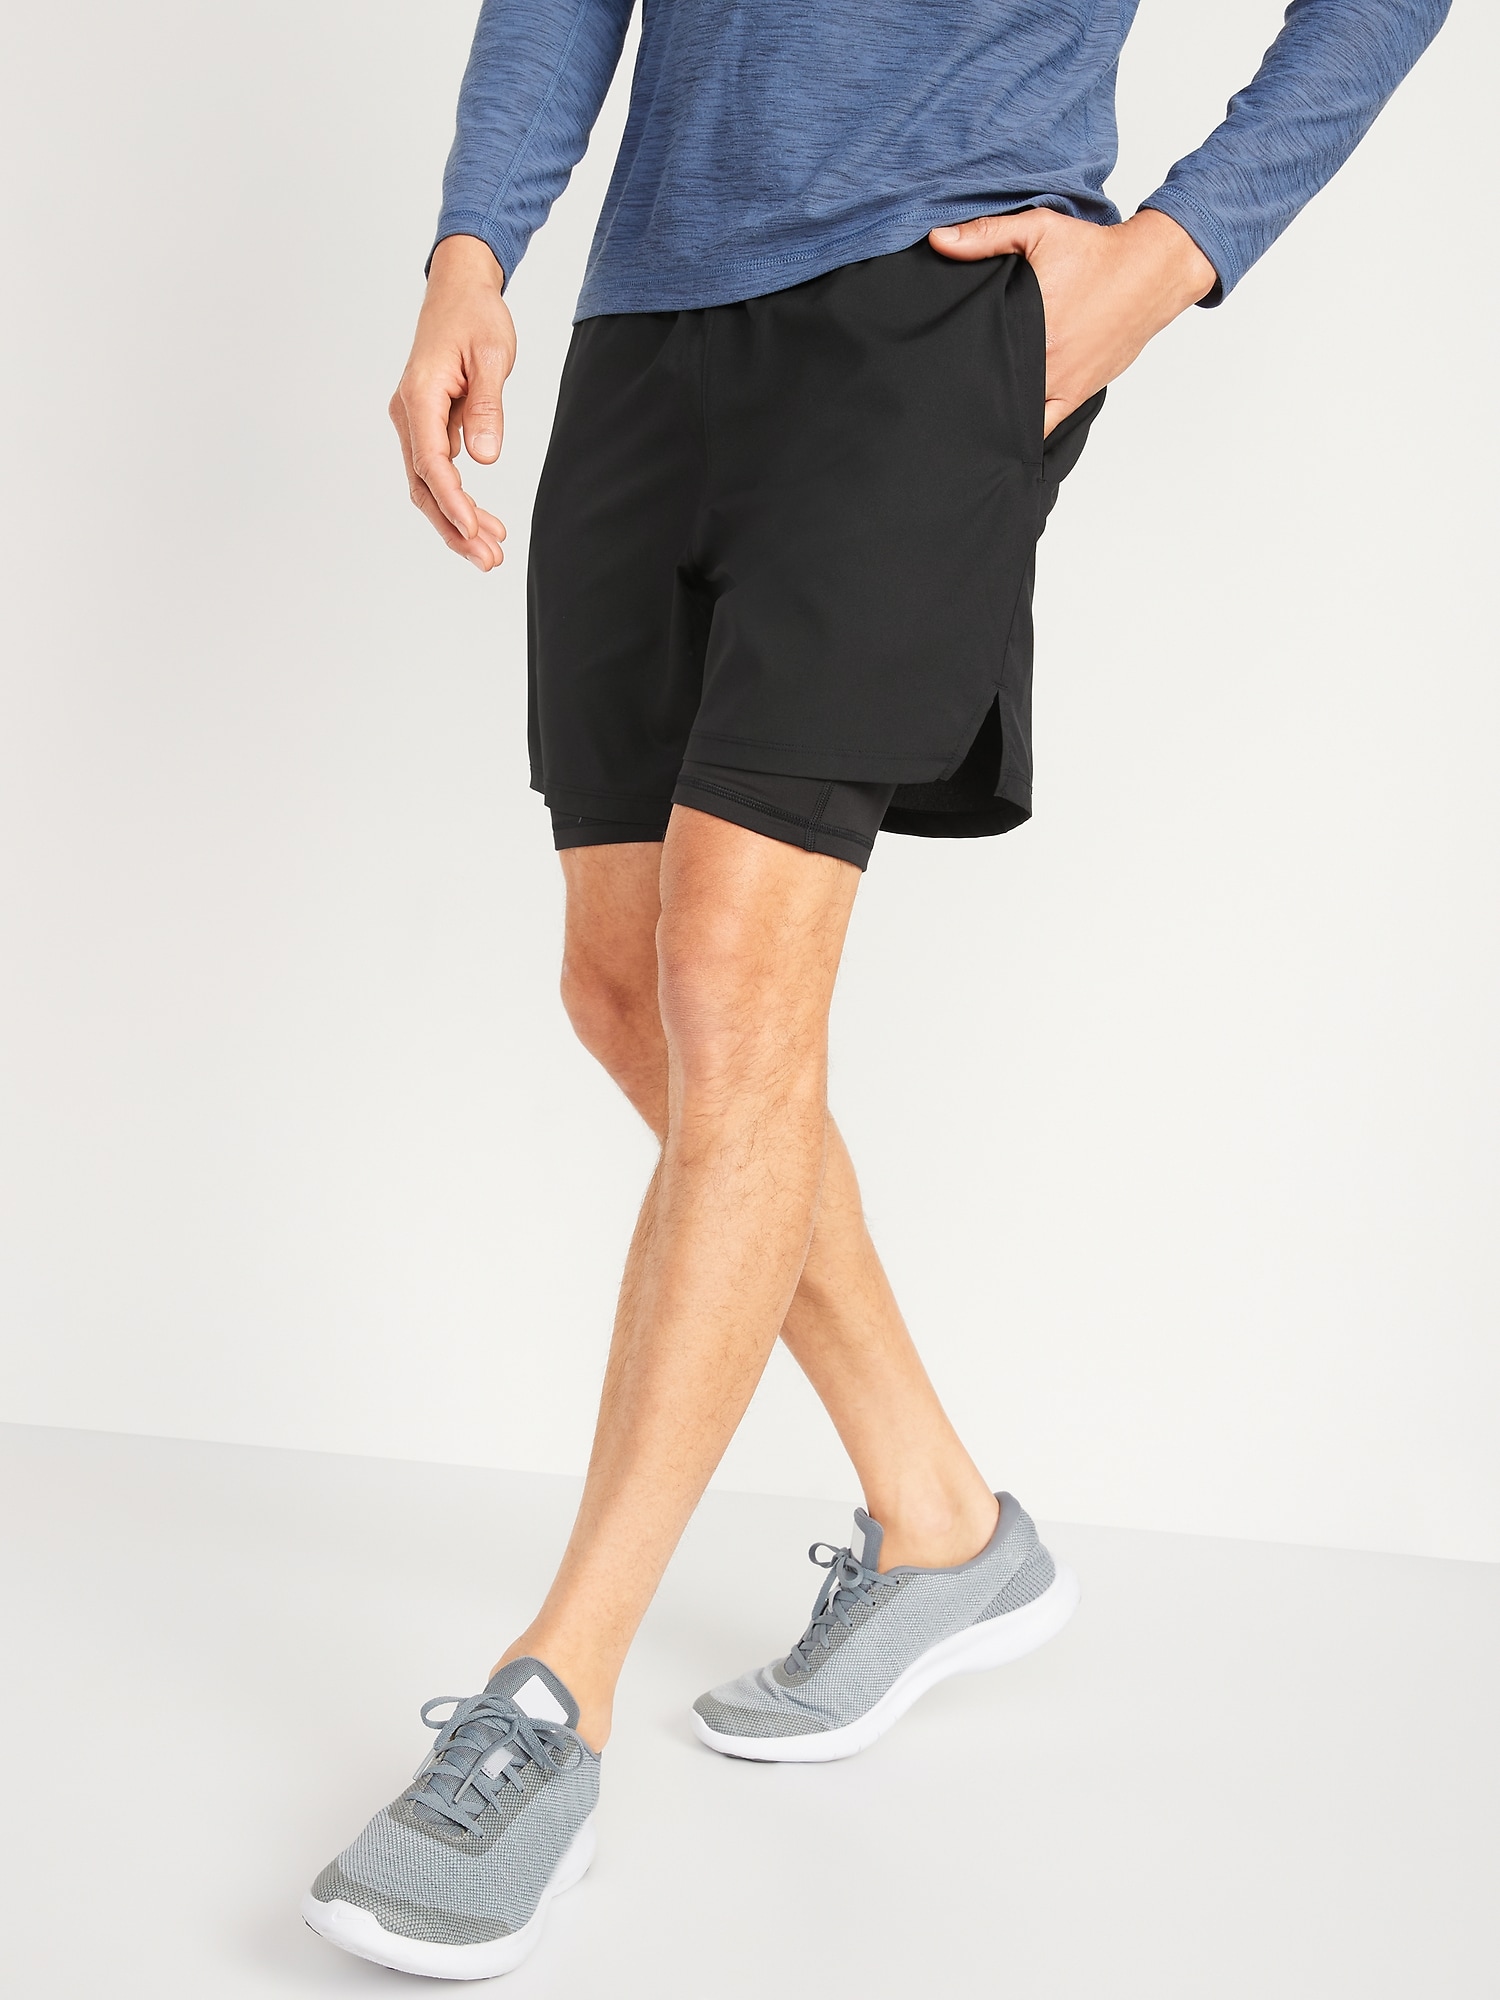 Generic Men's 2 In 1 Running Shorts With Pockets Compression Liner-M